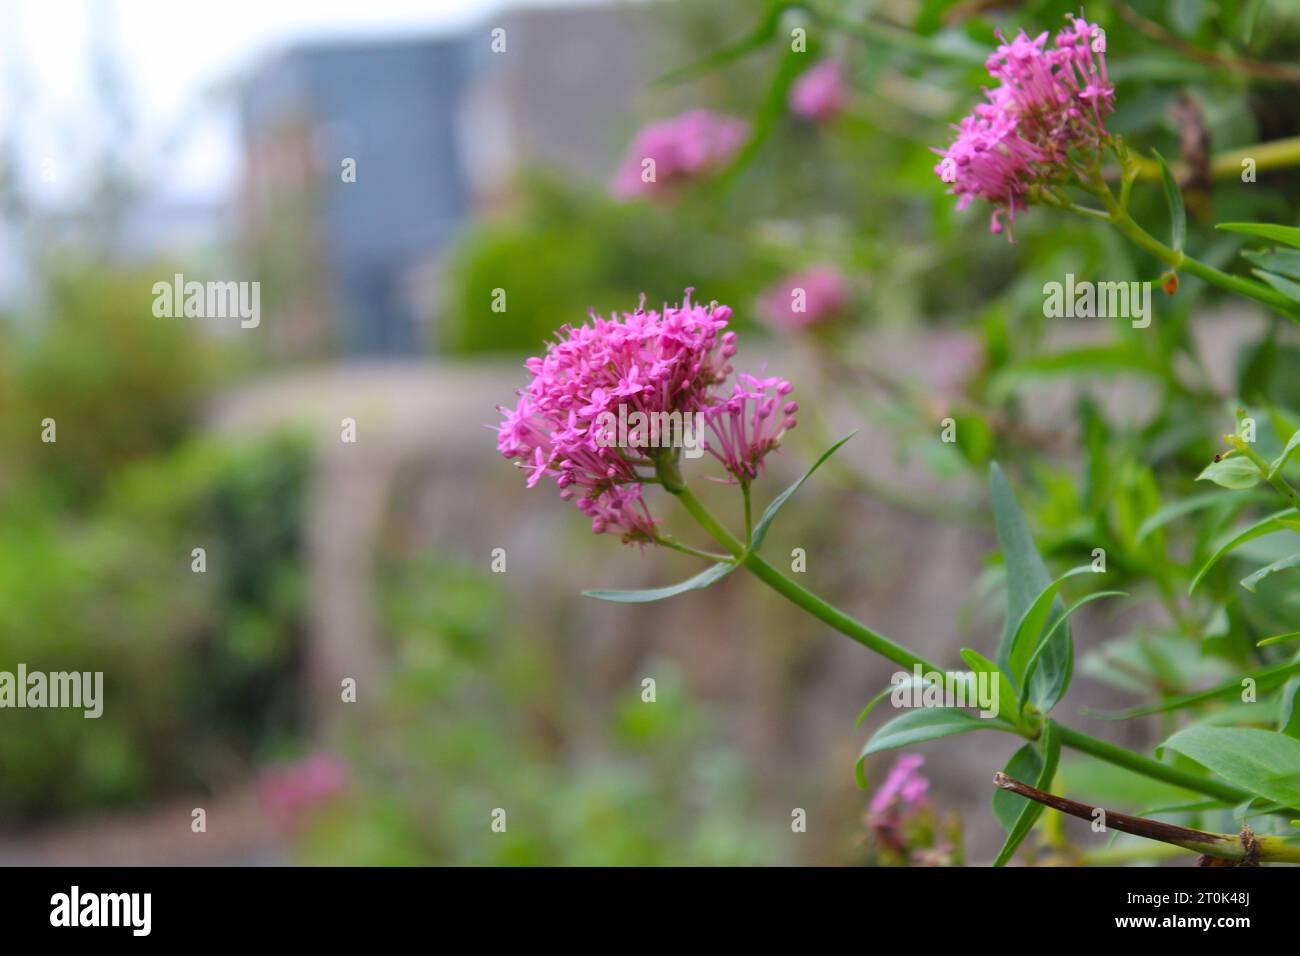 A photo of a Centranthus Ruber Red Valerian plant, flower. Stock Photo